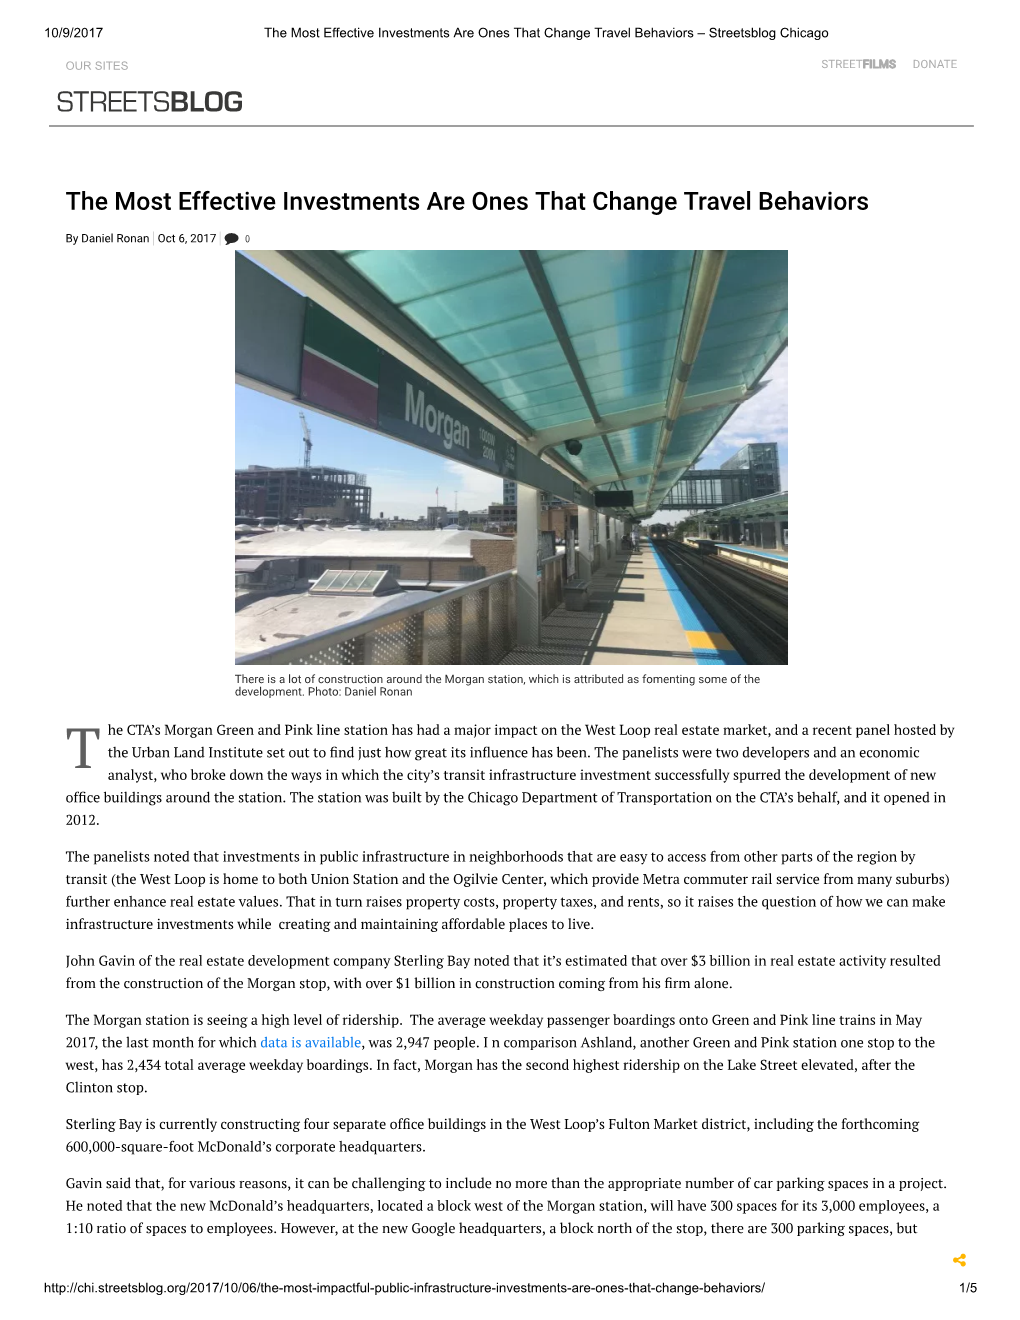 The Most Effective Investments Are Ones That Change Travel Behaviors – Streetsblog Chicago